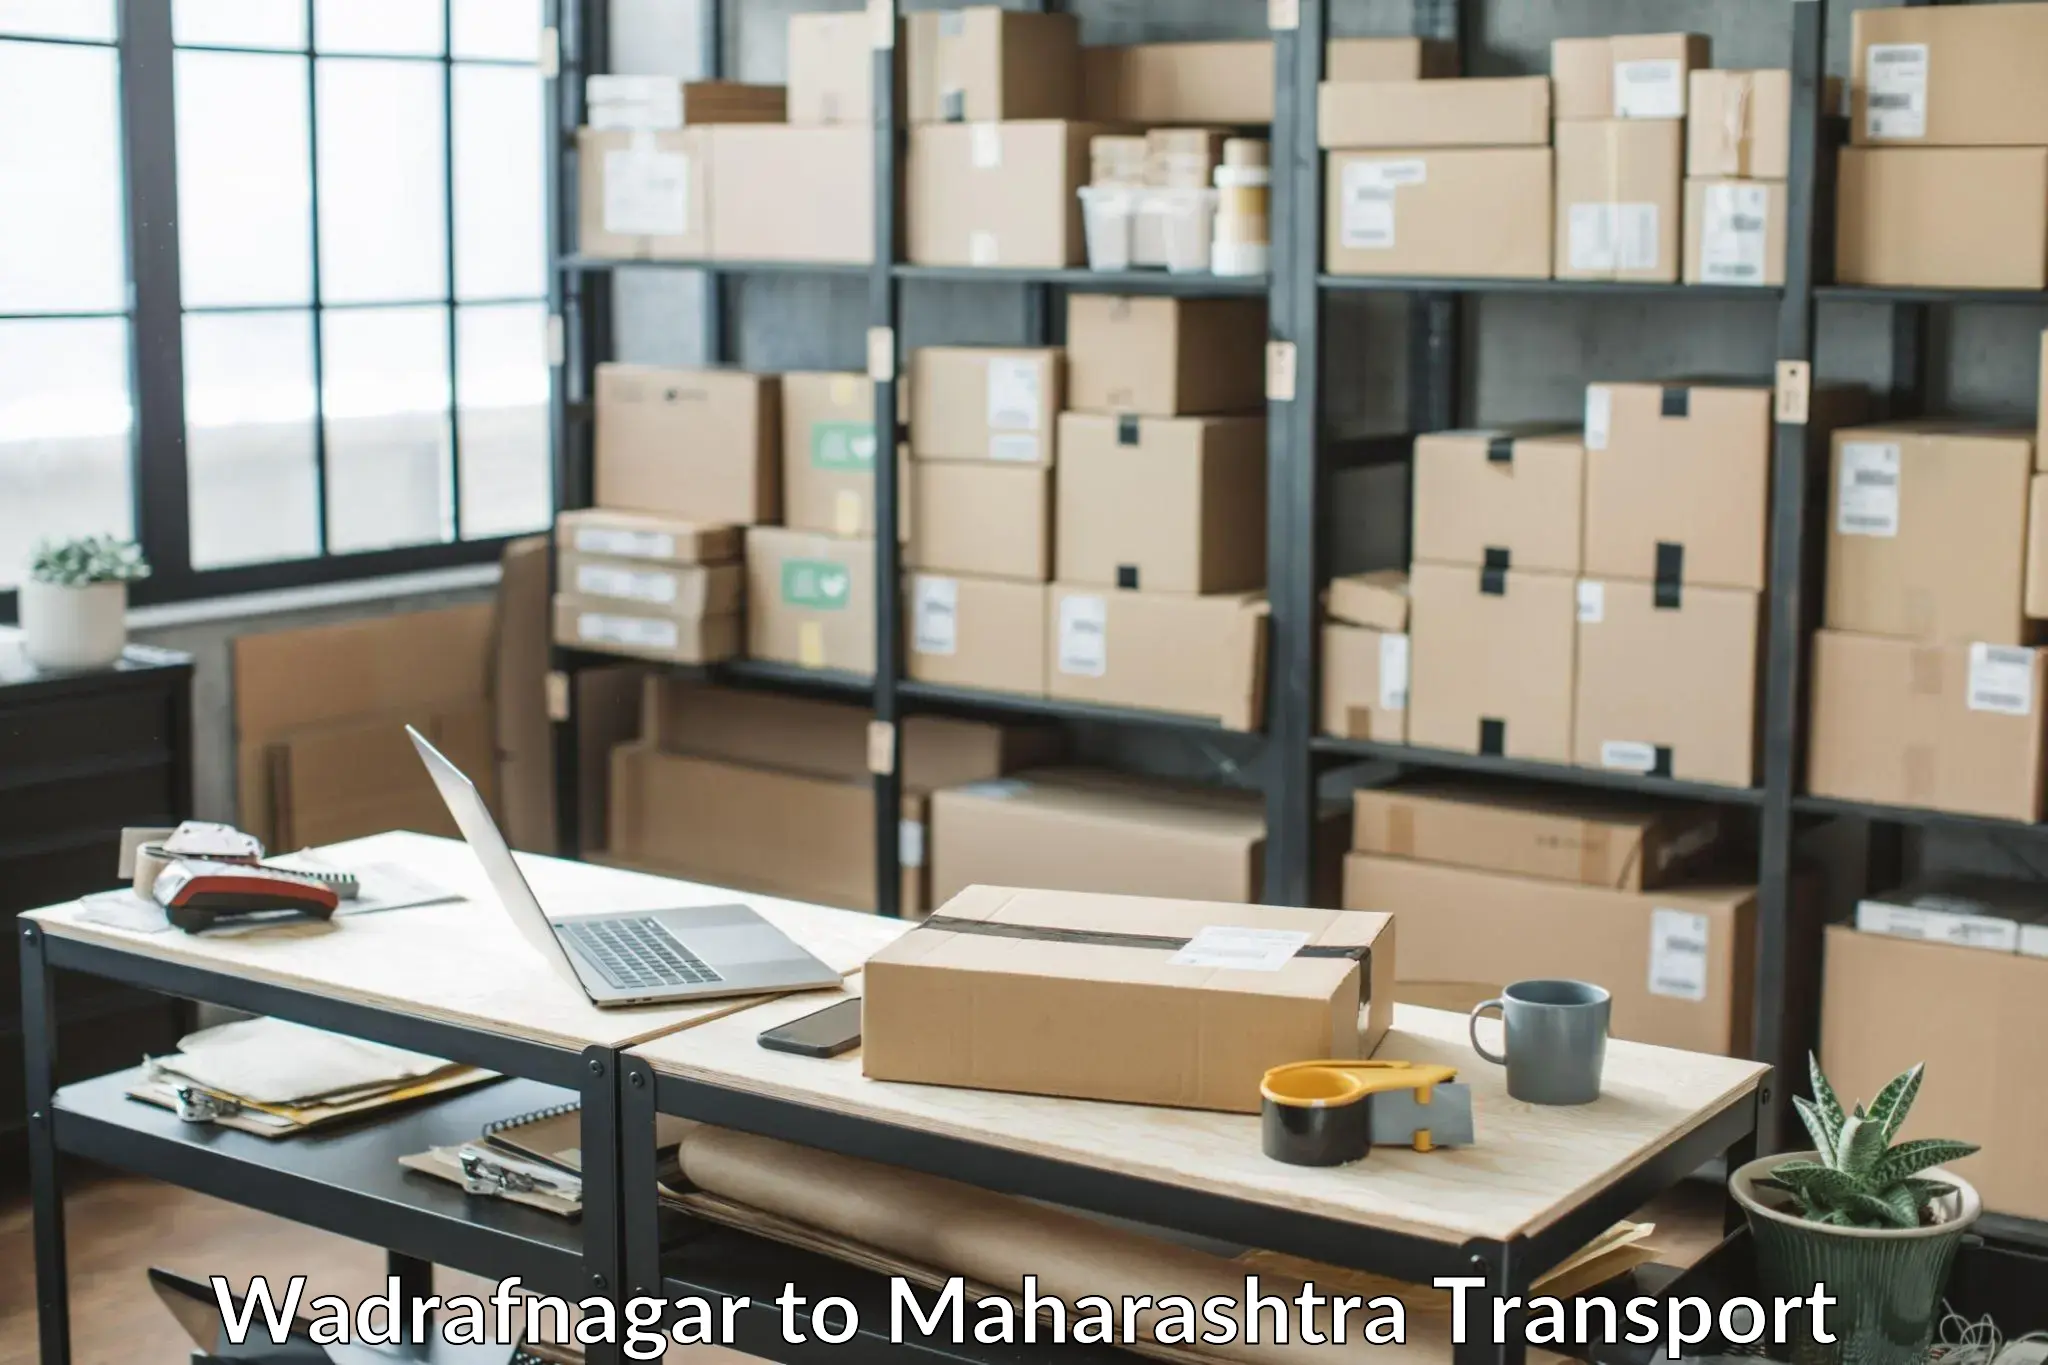 Package delivery services Wadrafnagar to Pen Raigad